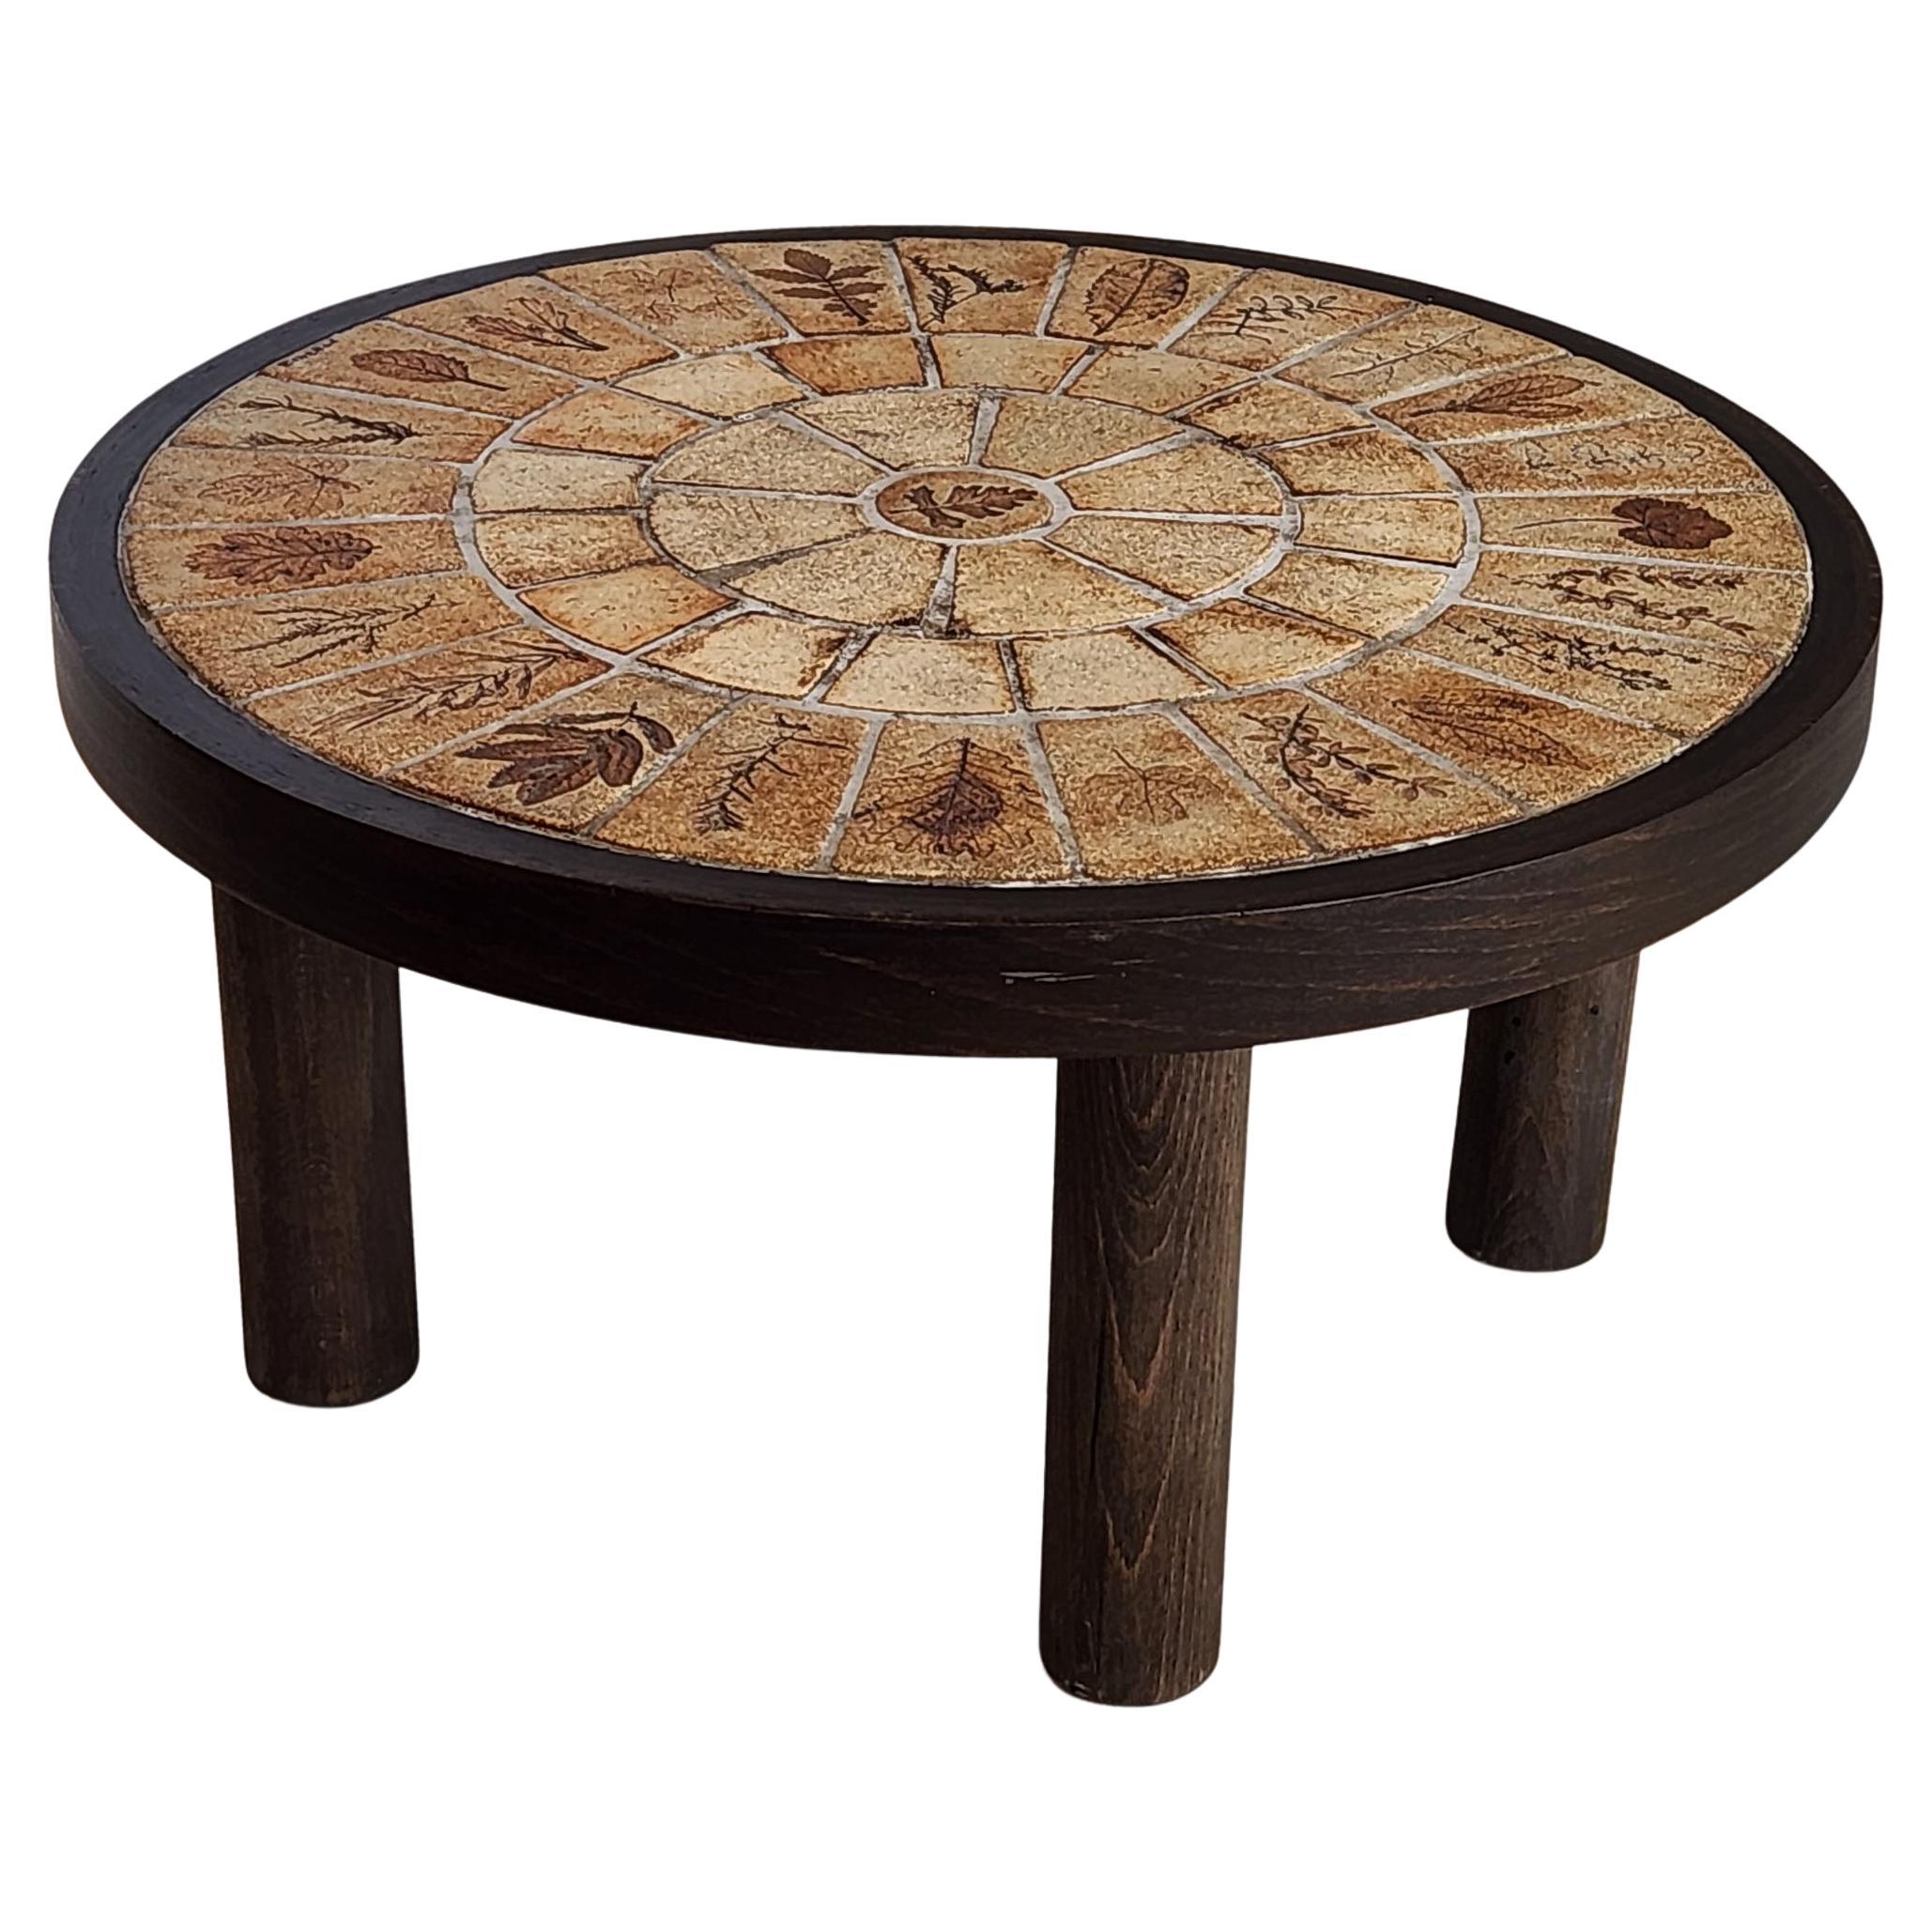 Roger Capron - Vintage Round Side Table with Garrigue Tiles on Wood Frame  For Sale